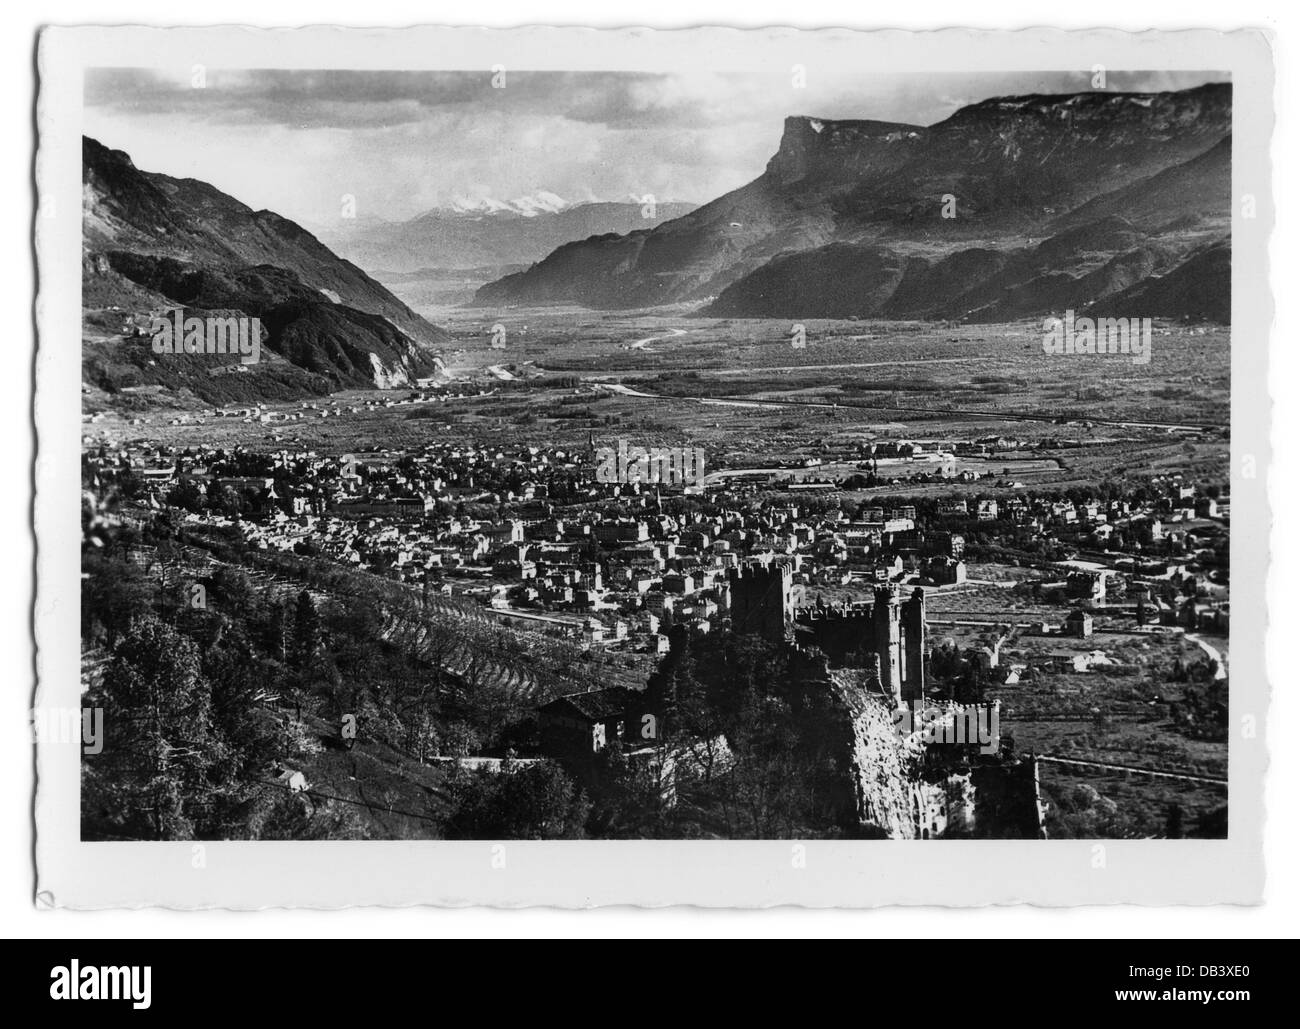 Italy, Merano, view with Brunnenburg, picture postcard, 1950s, Additional-Rights-Clearences-Not Available Stock Photo